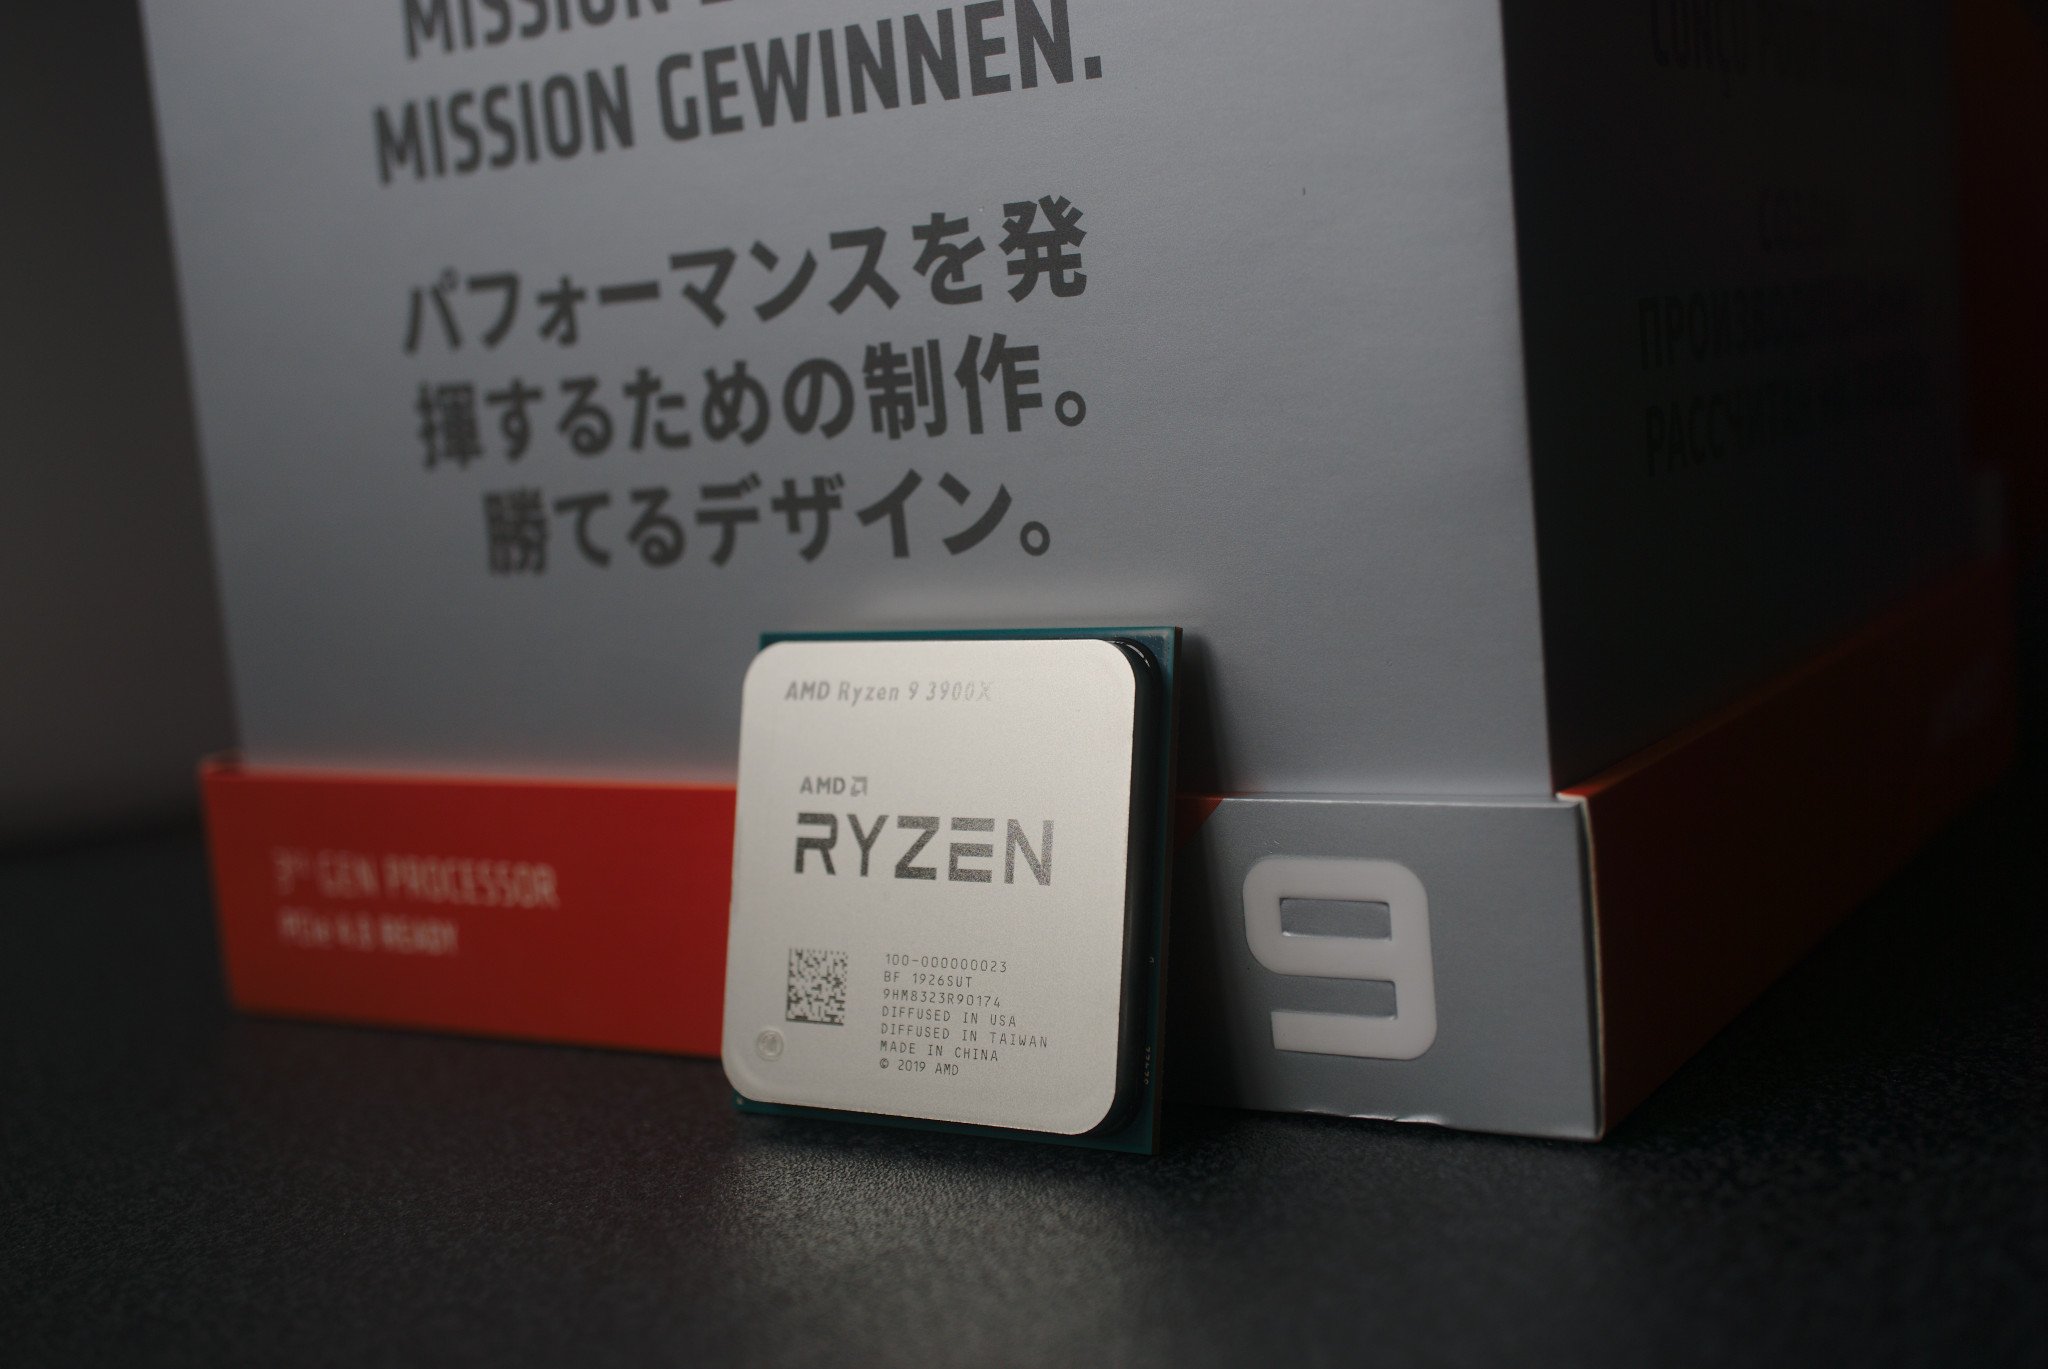 AMD Ryzen 9 3900X review: Amazing multi-core CPU performance at an